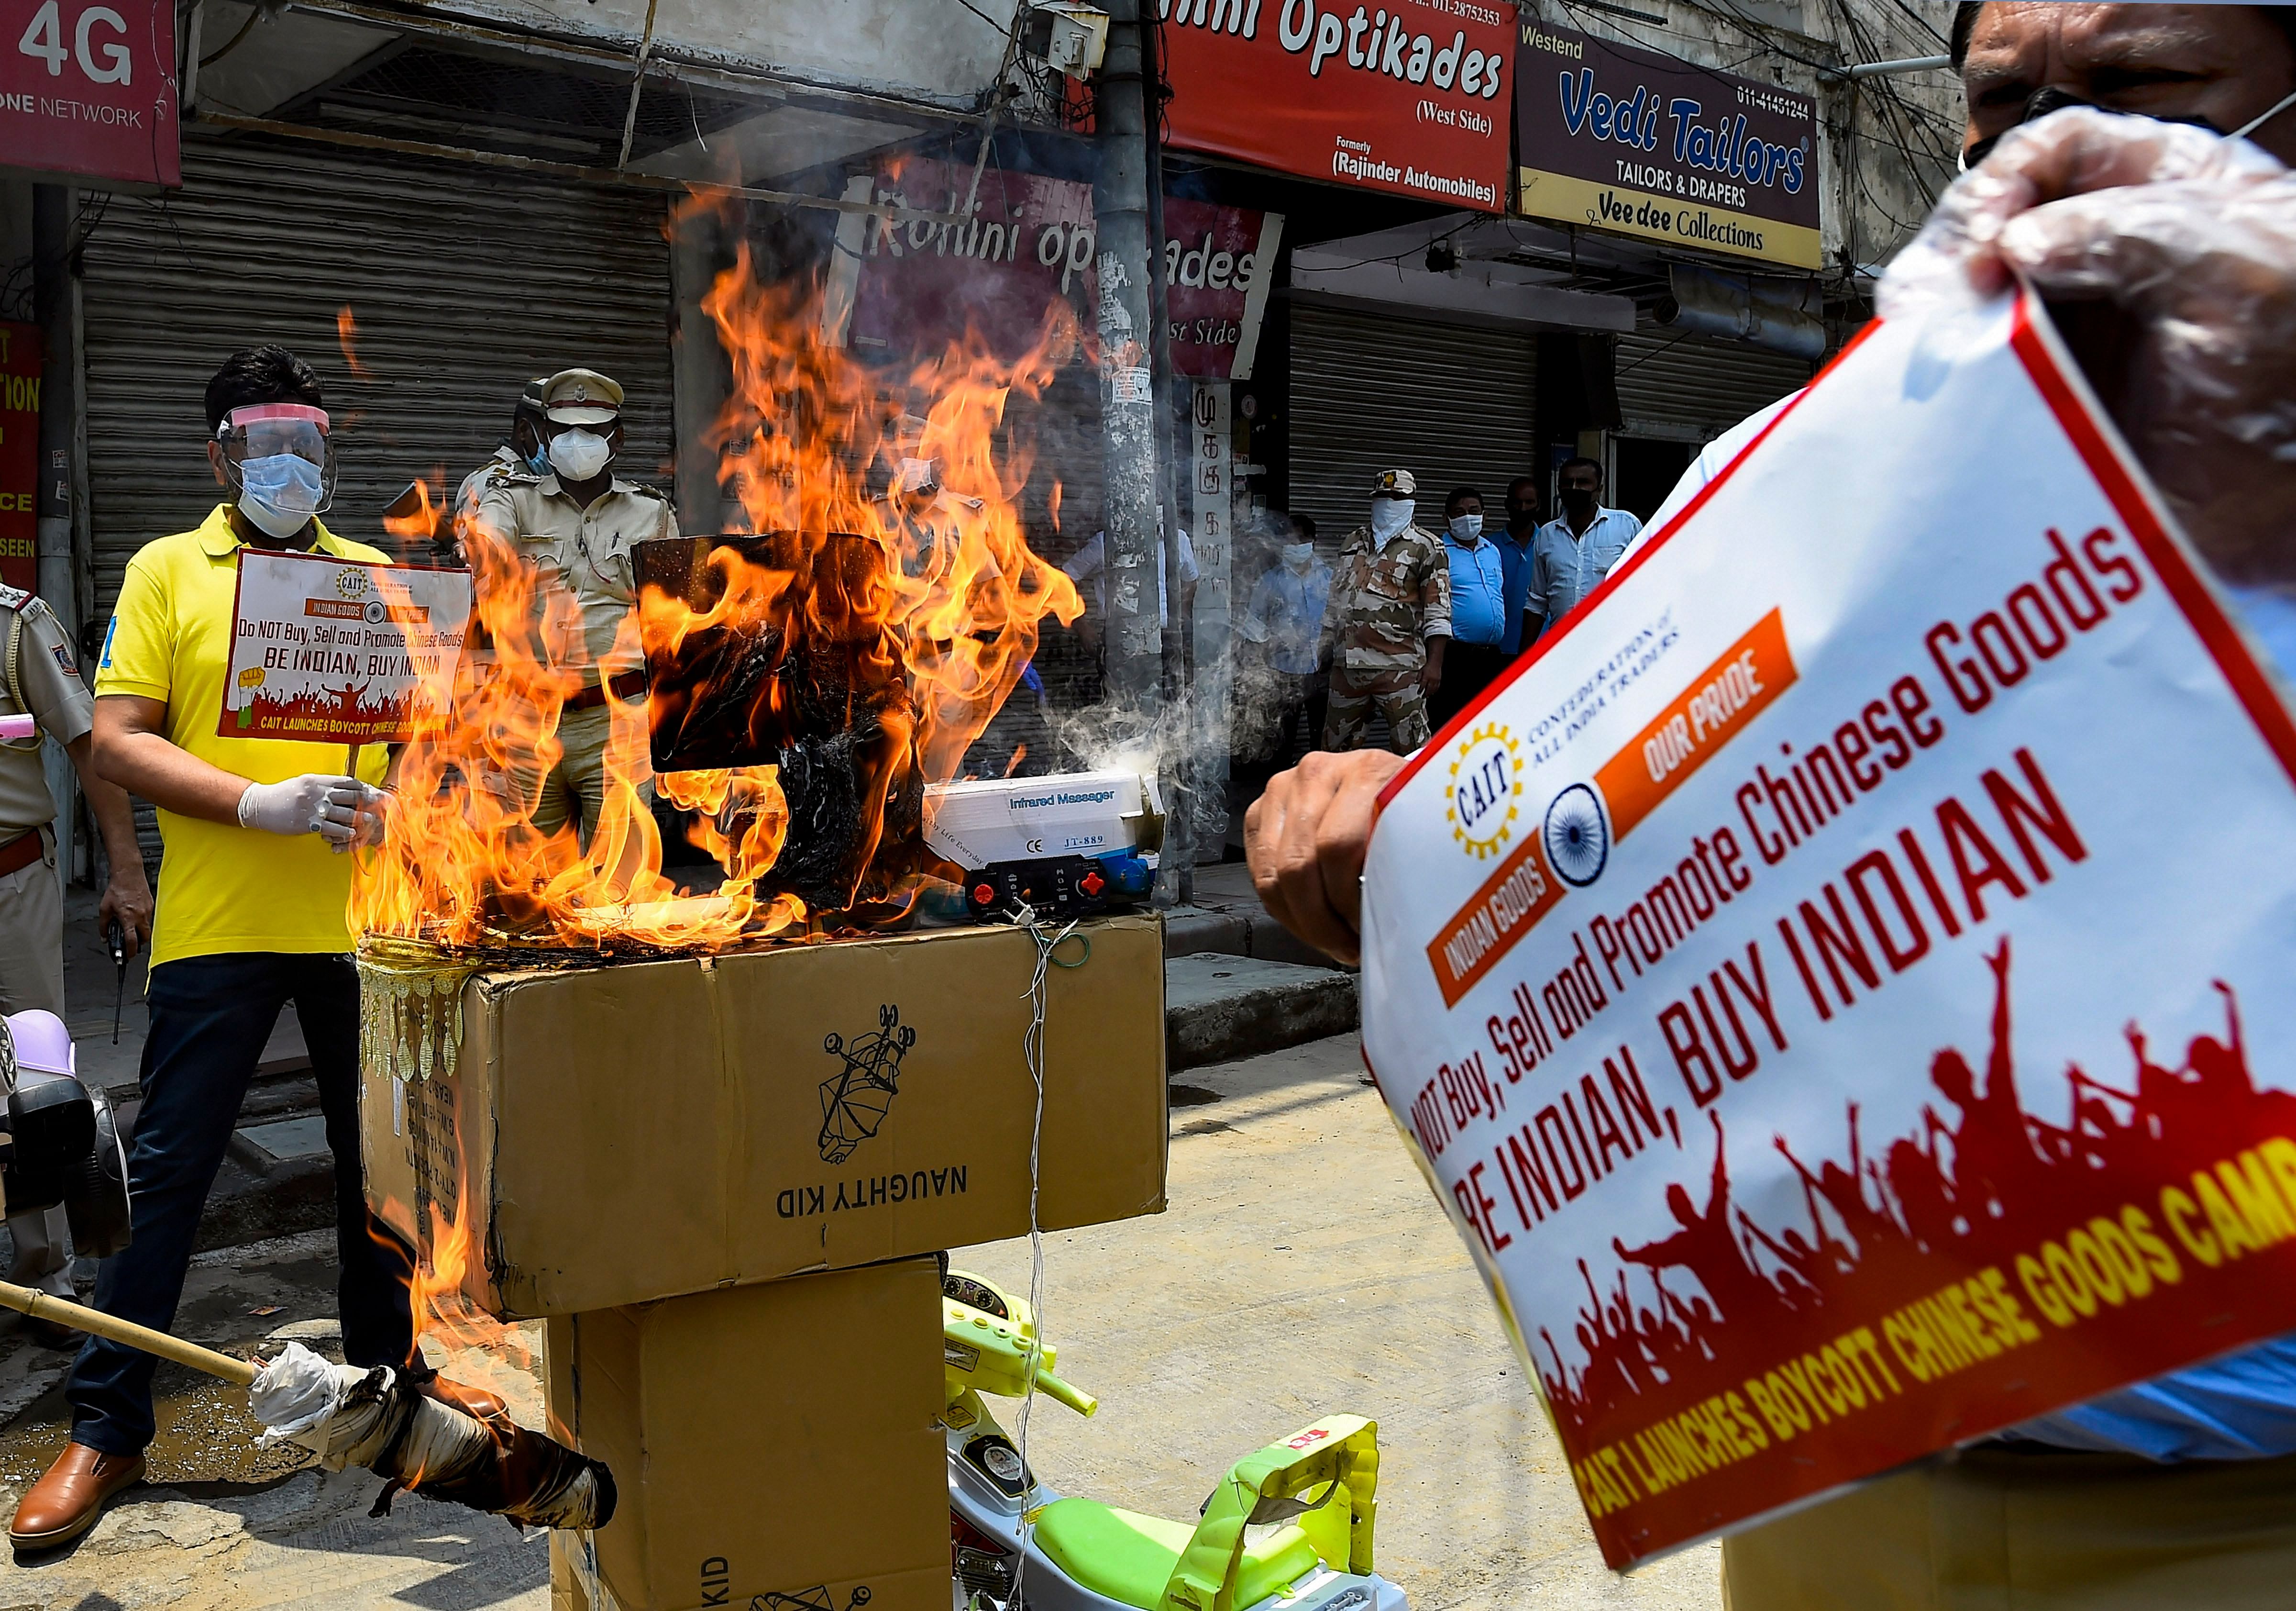 Activists of Confederation of All India Traders (CAIT) burn Chinese goods during a protest against the killing of 20 soldiers by Chinese troops in Ladakh last week, in New Delhi, Monday, June 22,2020. (PTI Photo)